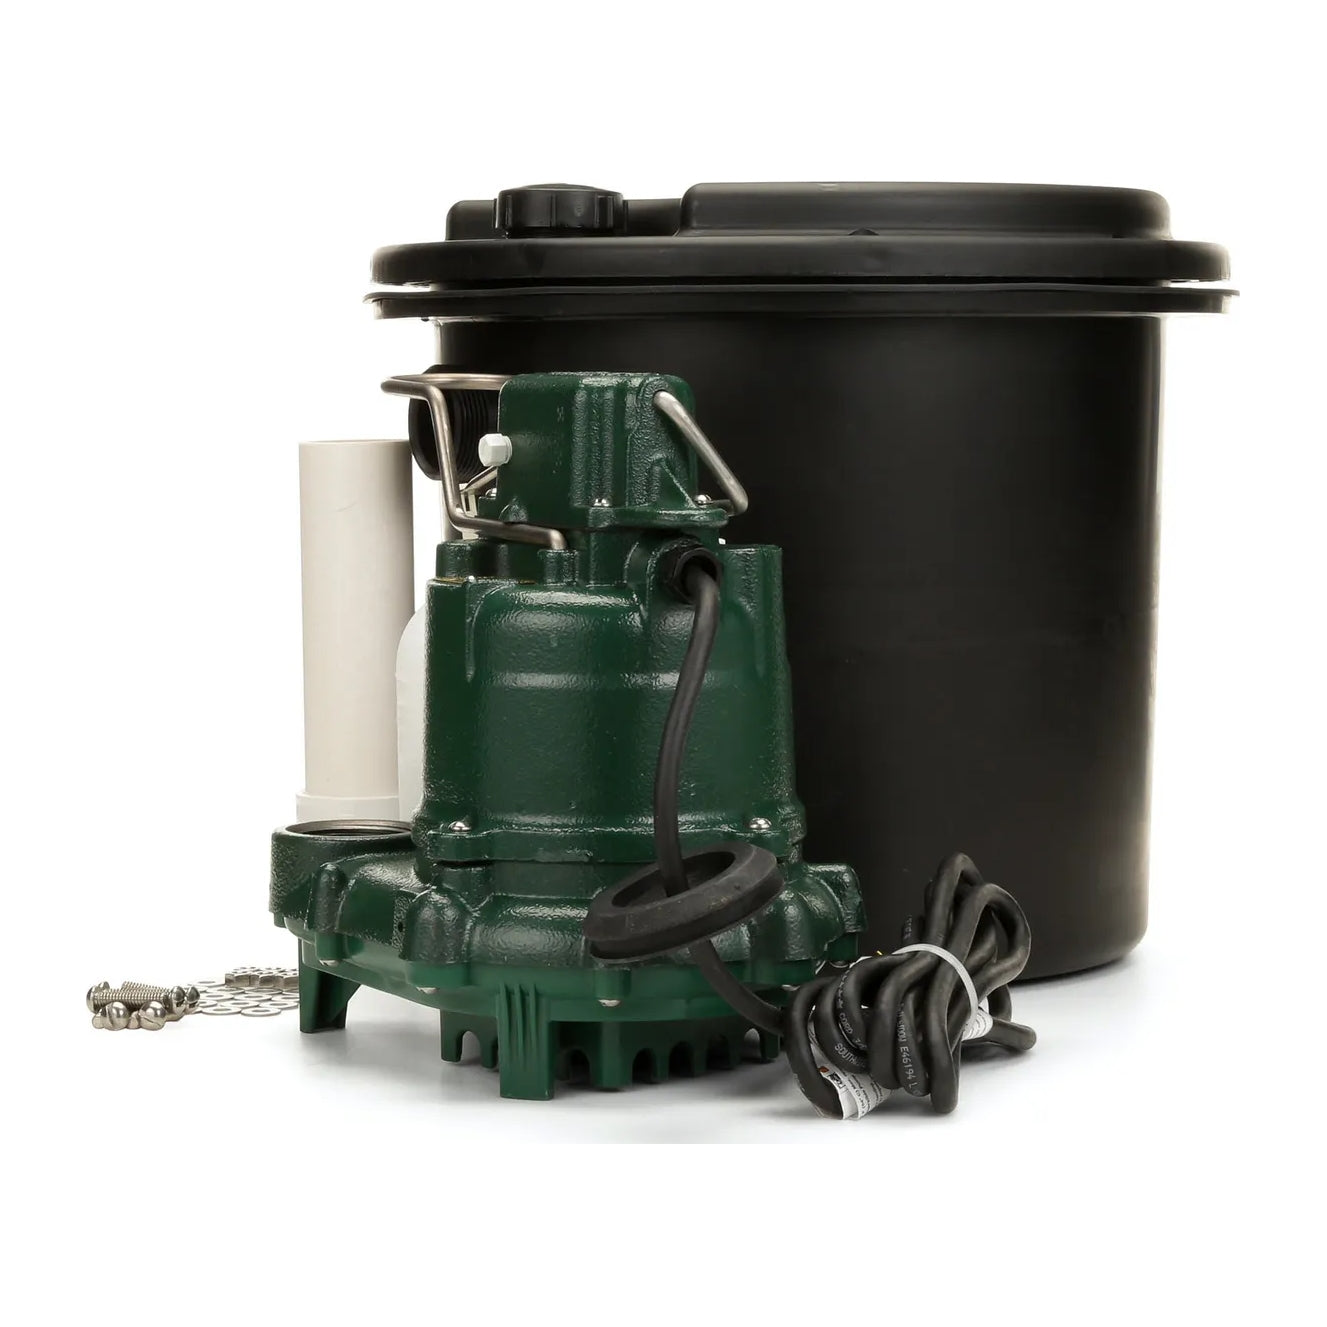 105-0001 - M53 Drain Pump Kit with 9 Ft Cord, 1/3 HP